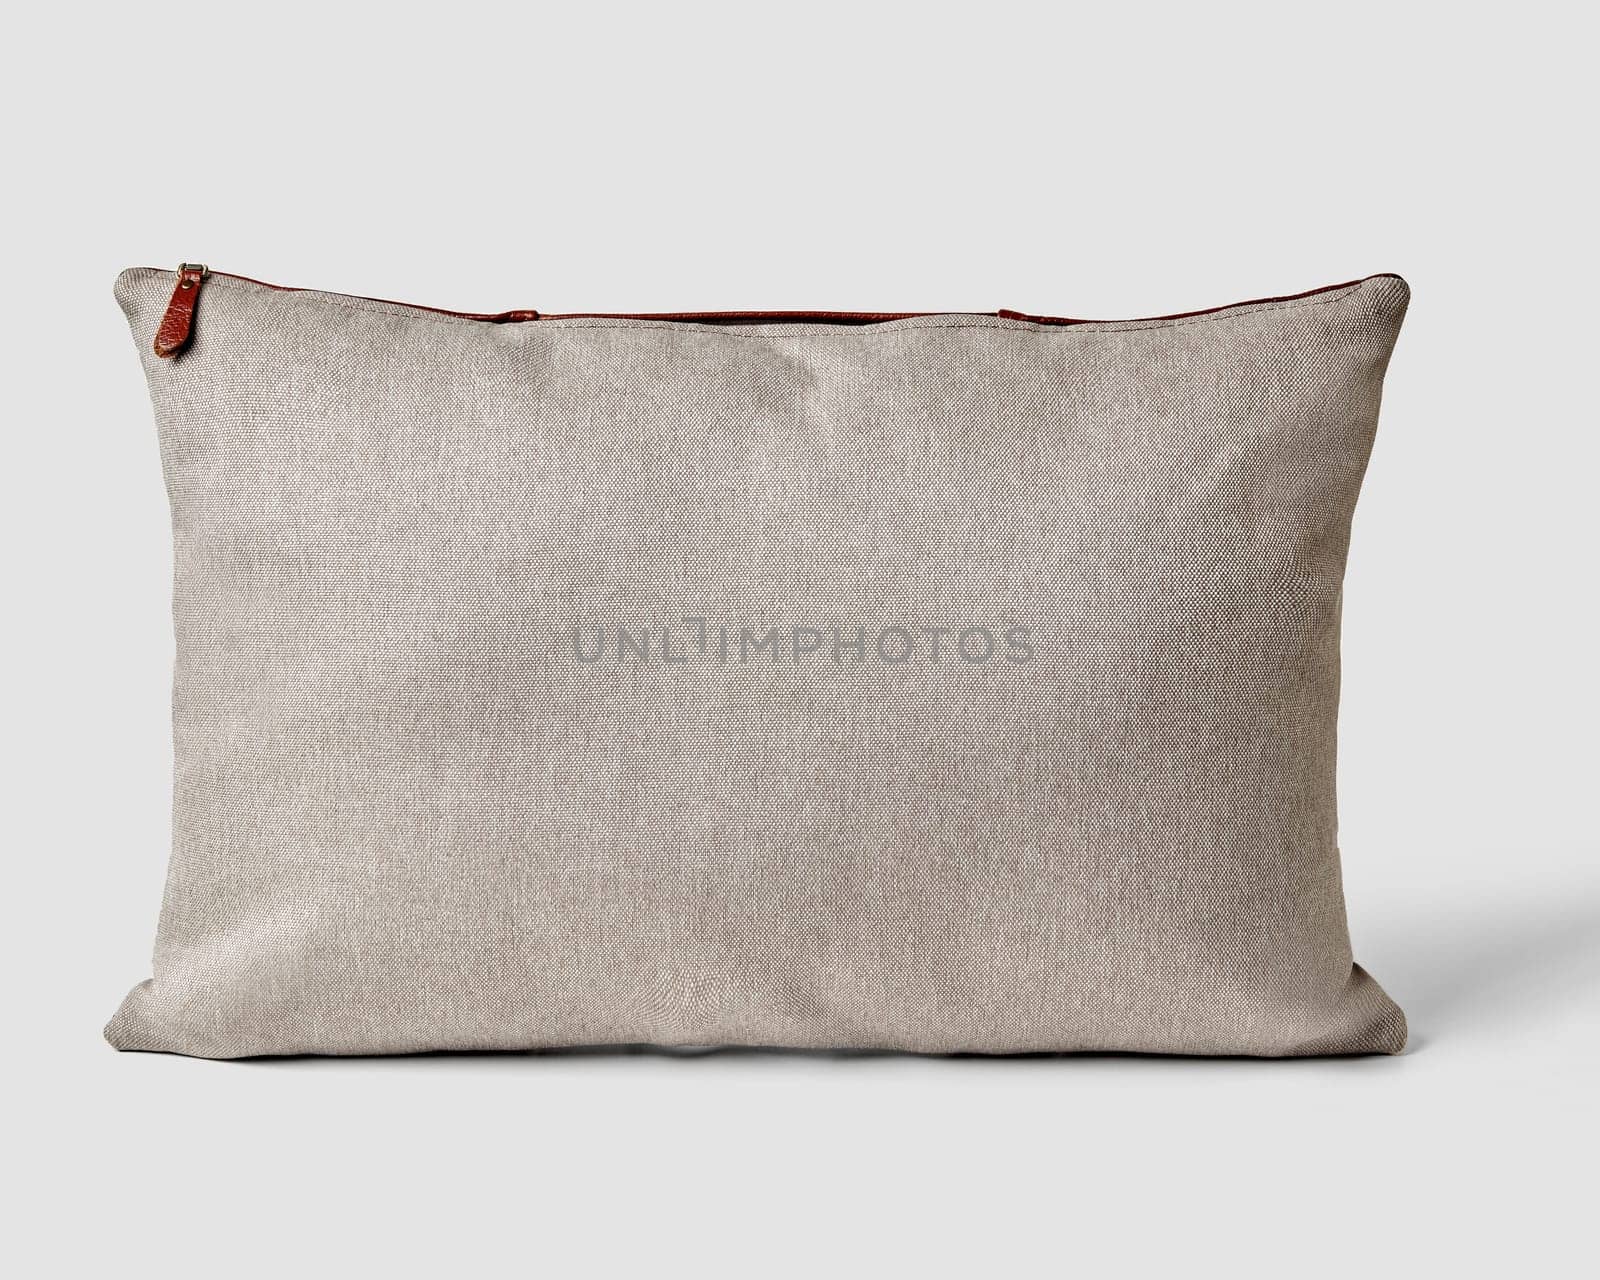 Natural textured grey fabric pillow featuring contrasting leather zipper, embodying modern and rustic home aesthetic. Handcrafted accessory for interior design